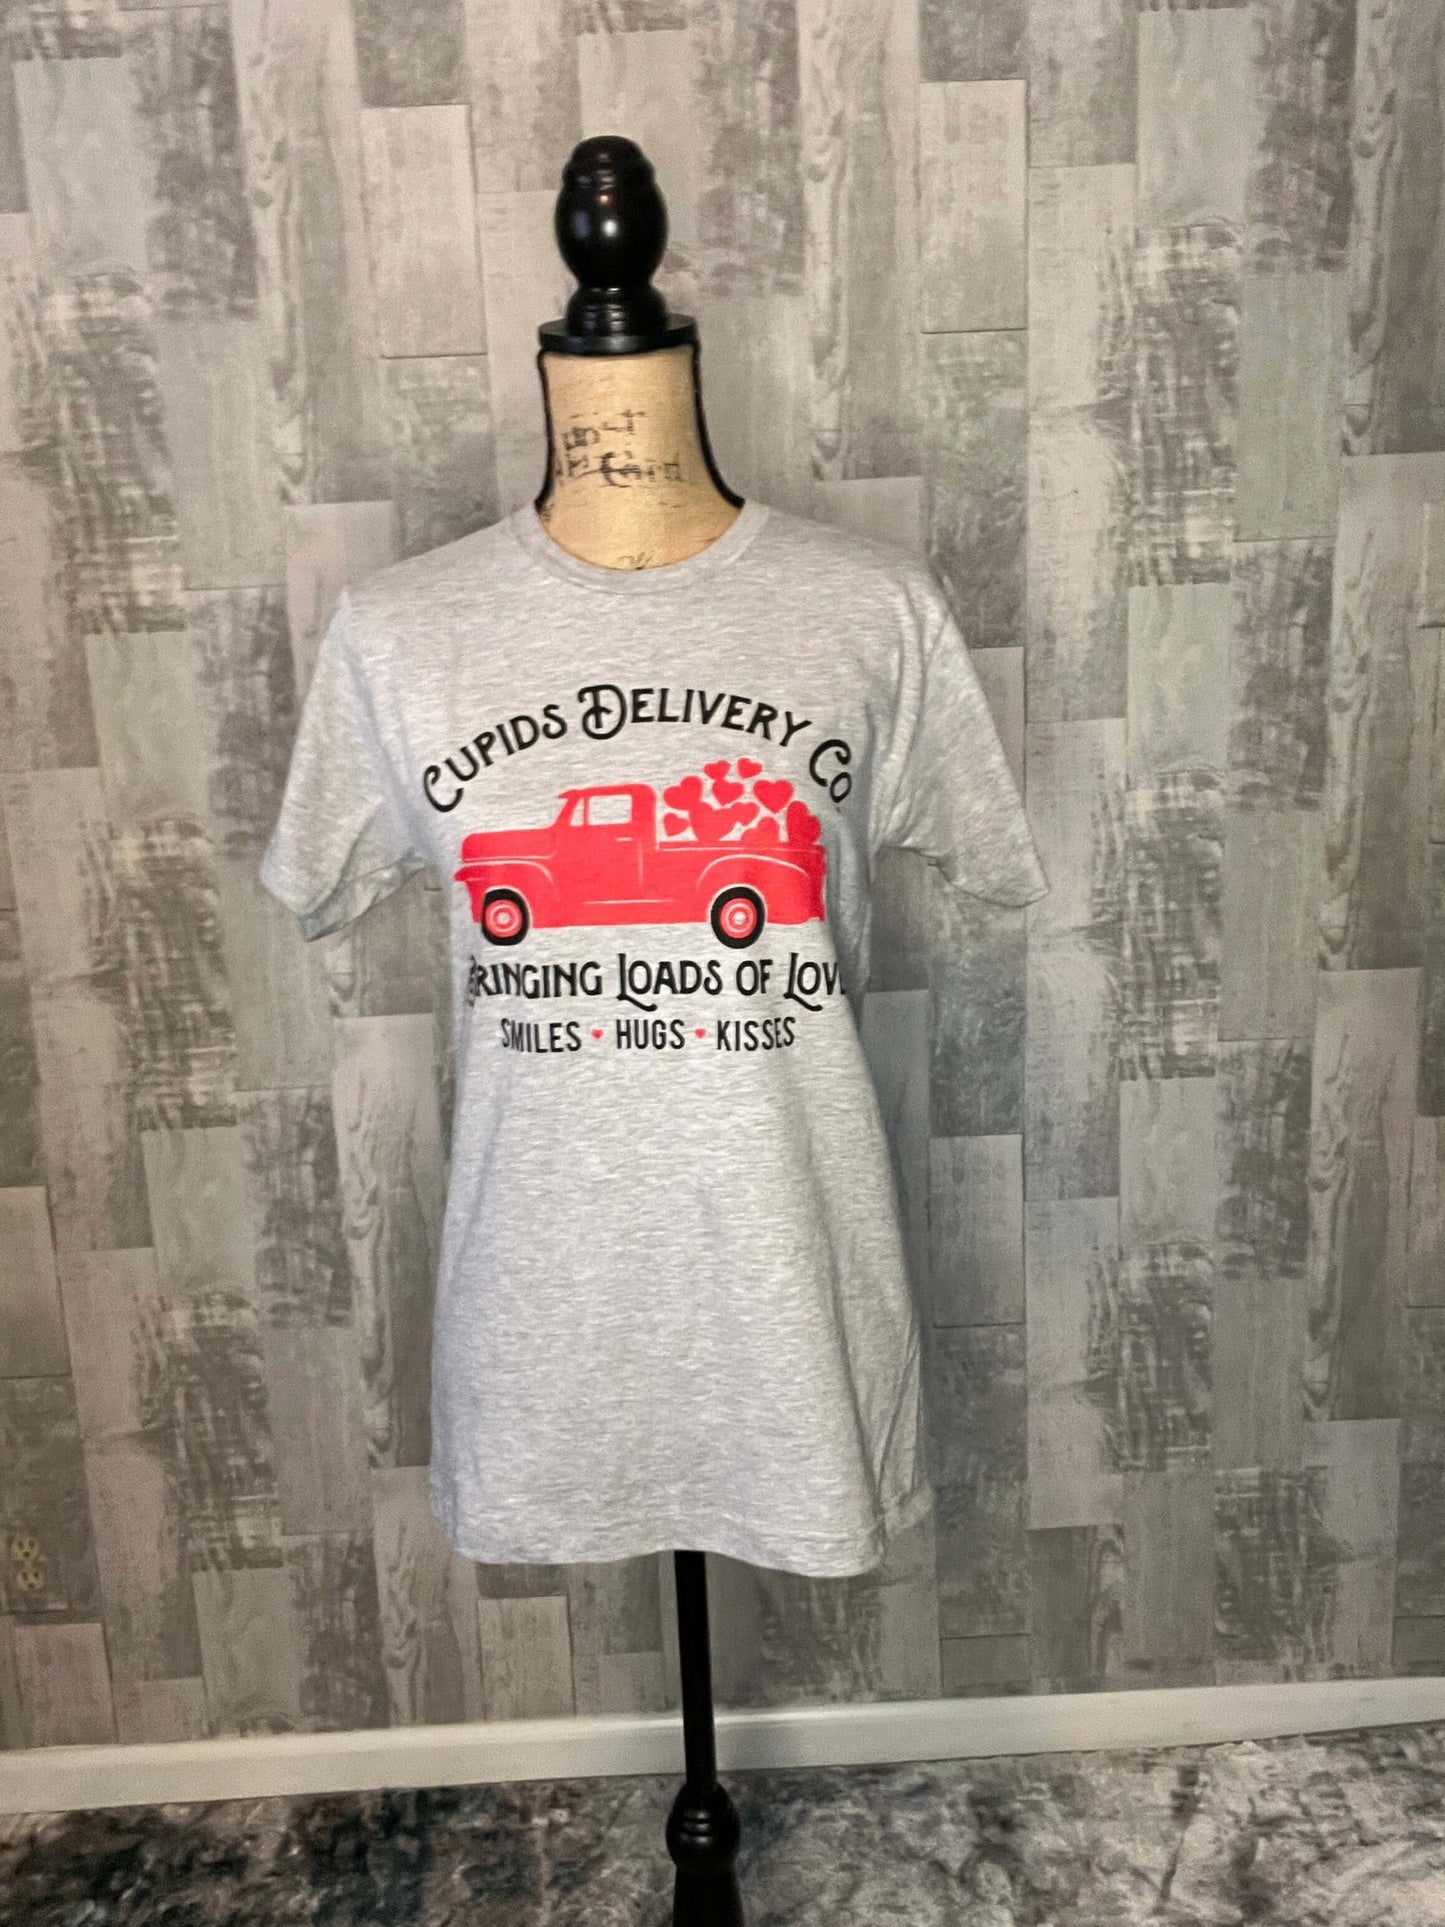 Shirts & Tops bringing loads of love graphic tee, clothing, Cupids Delivery Co, graphic, graphic tee, Graphic Tees, V day graphic tee, Valentine's graphic tee, Vday graphic tee, vintage truck graphic tee Size: Small, Medium, Large, XL